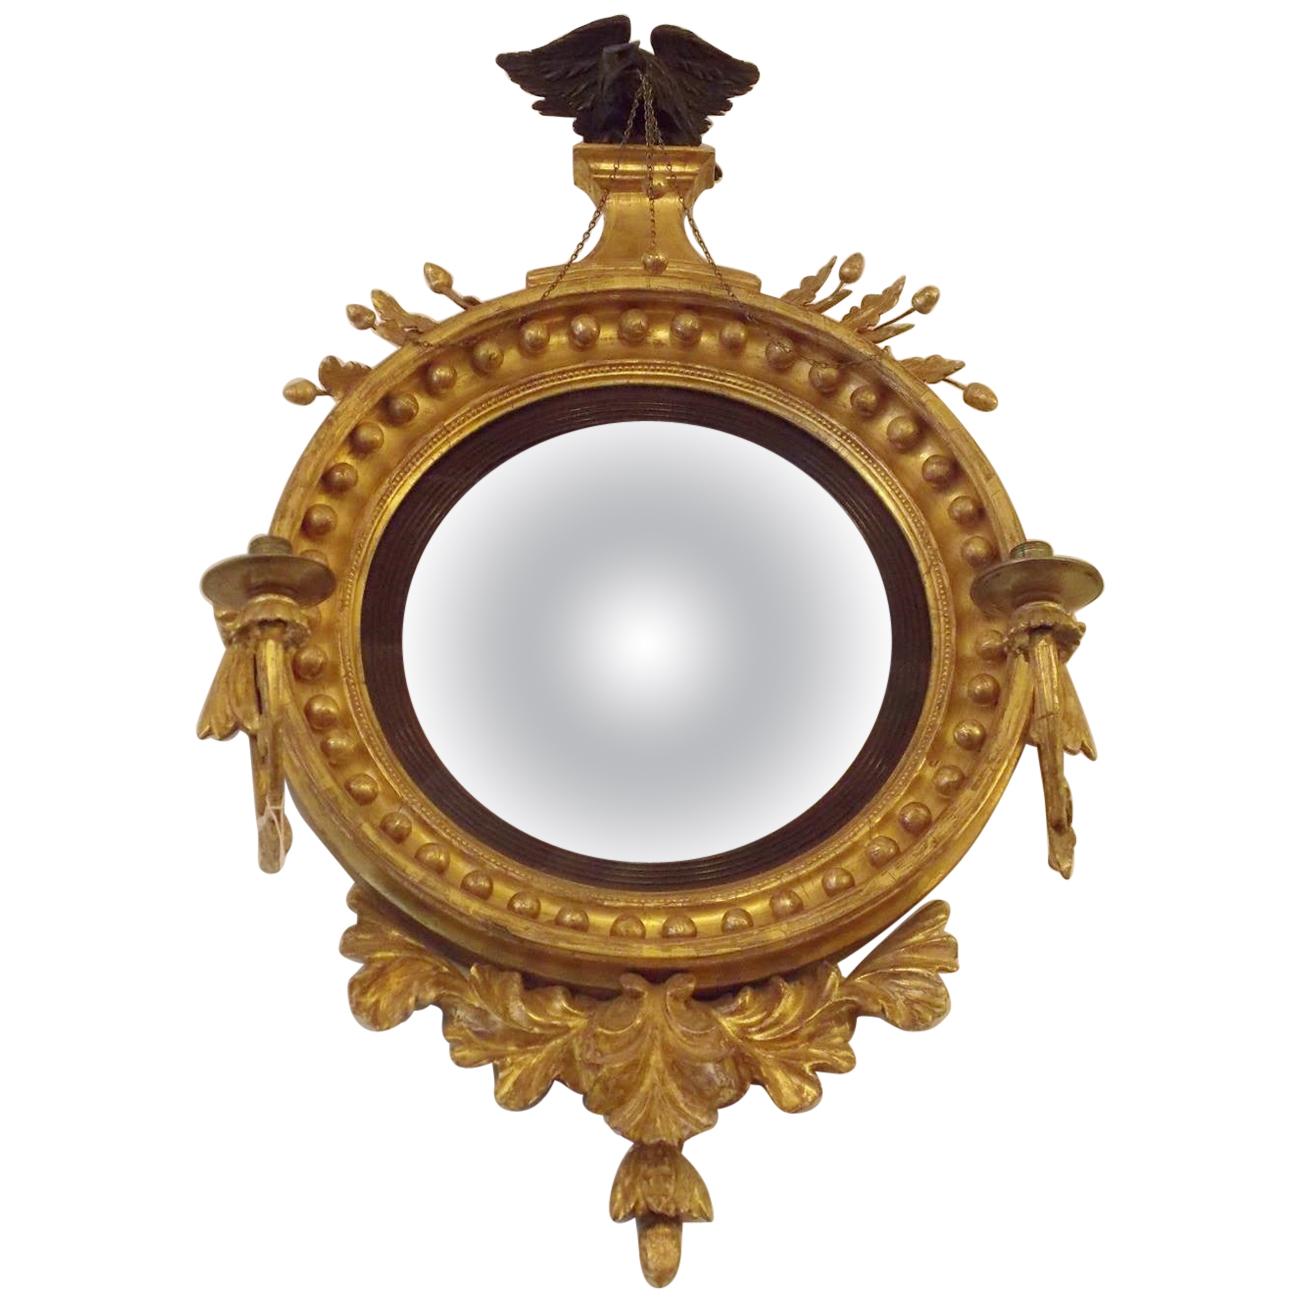 What is a Federal convex mirror?